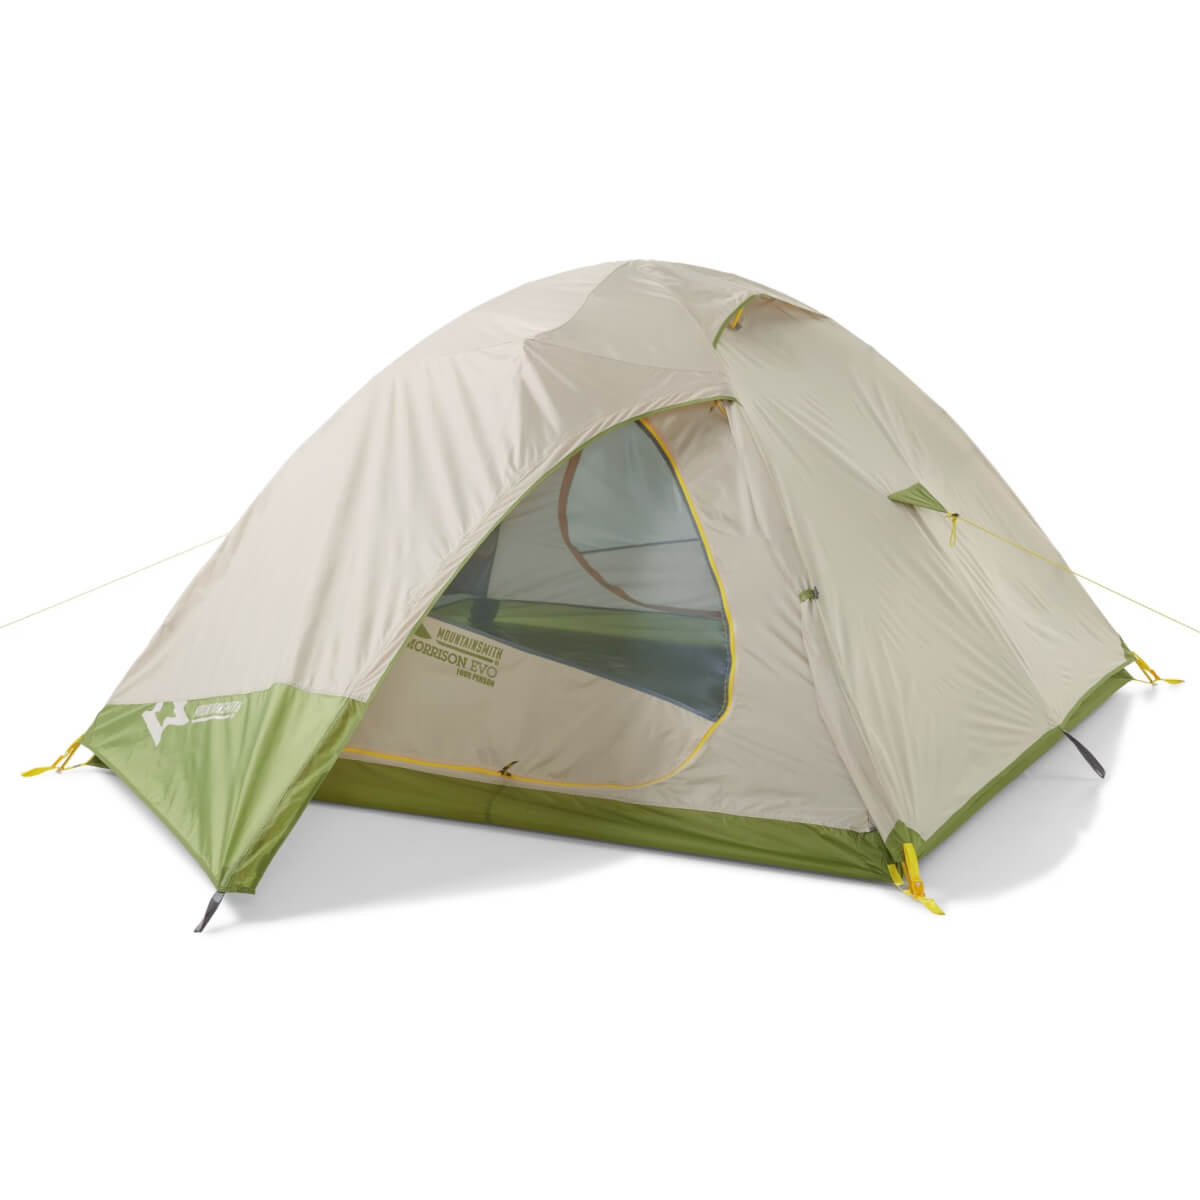 Mountainsmith Morrison EVO 4 person backpacking tent